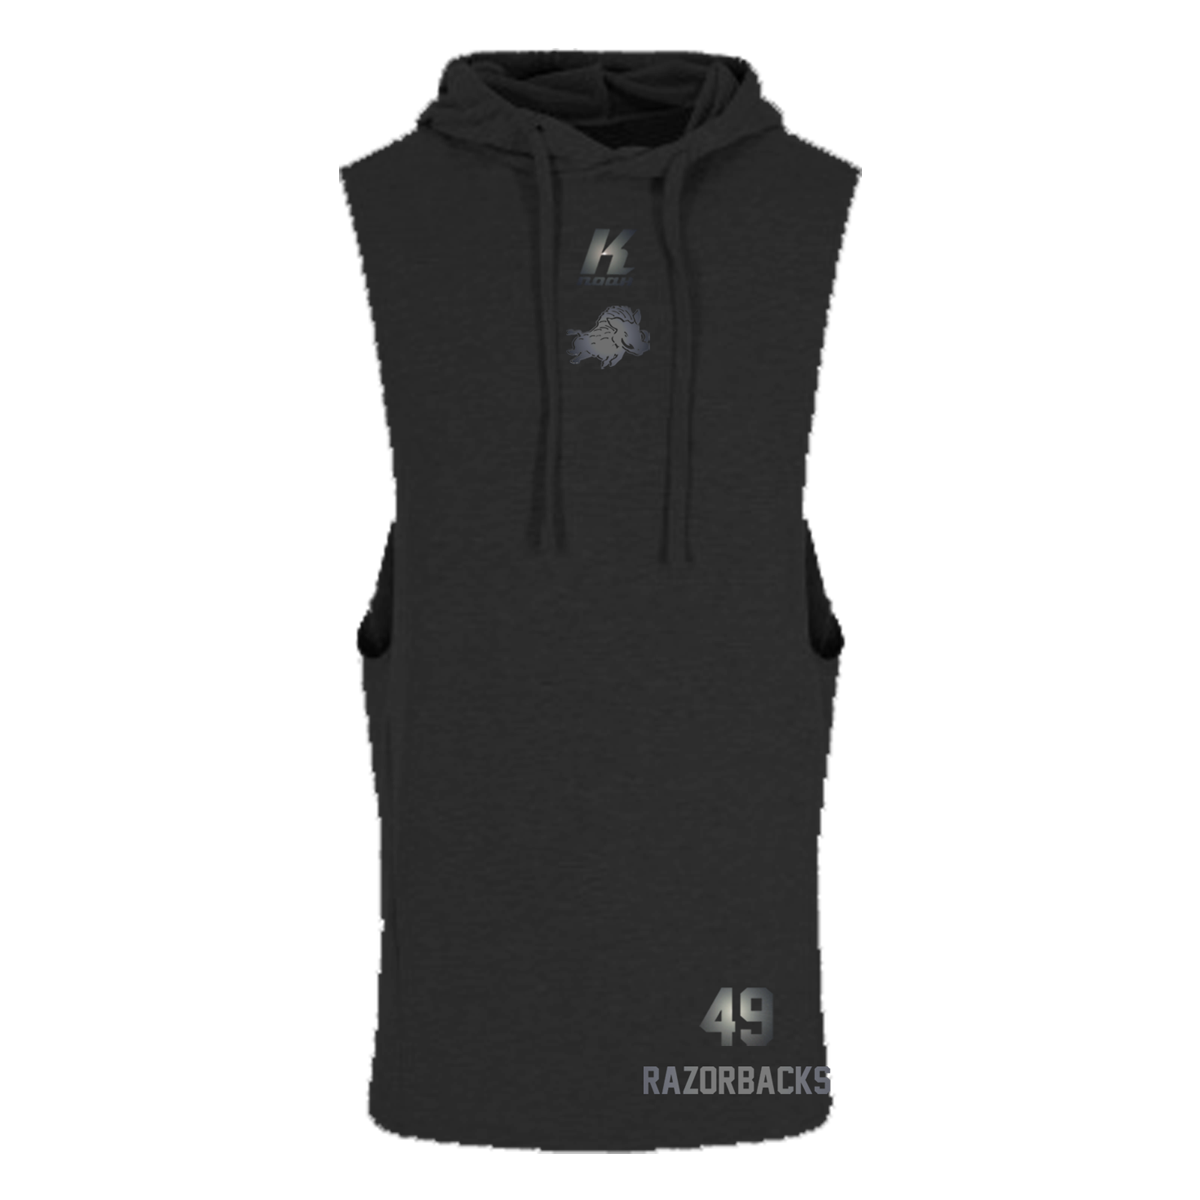 Razorbacks "Blackline" Sleeveless Muscle Hoodie JC053 with Playernumber or Initials